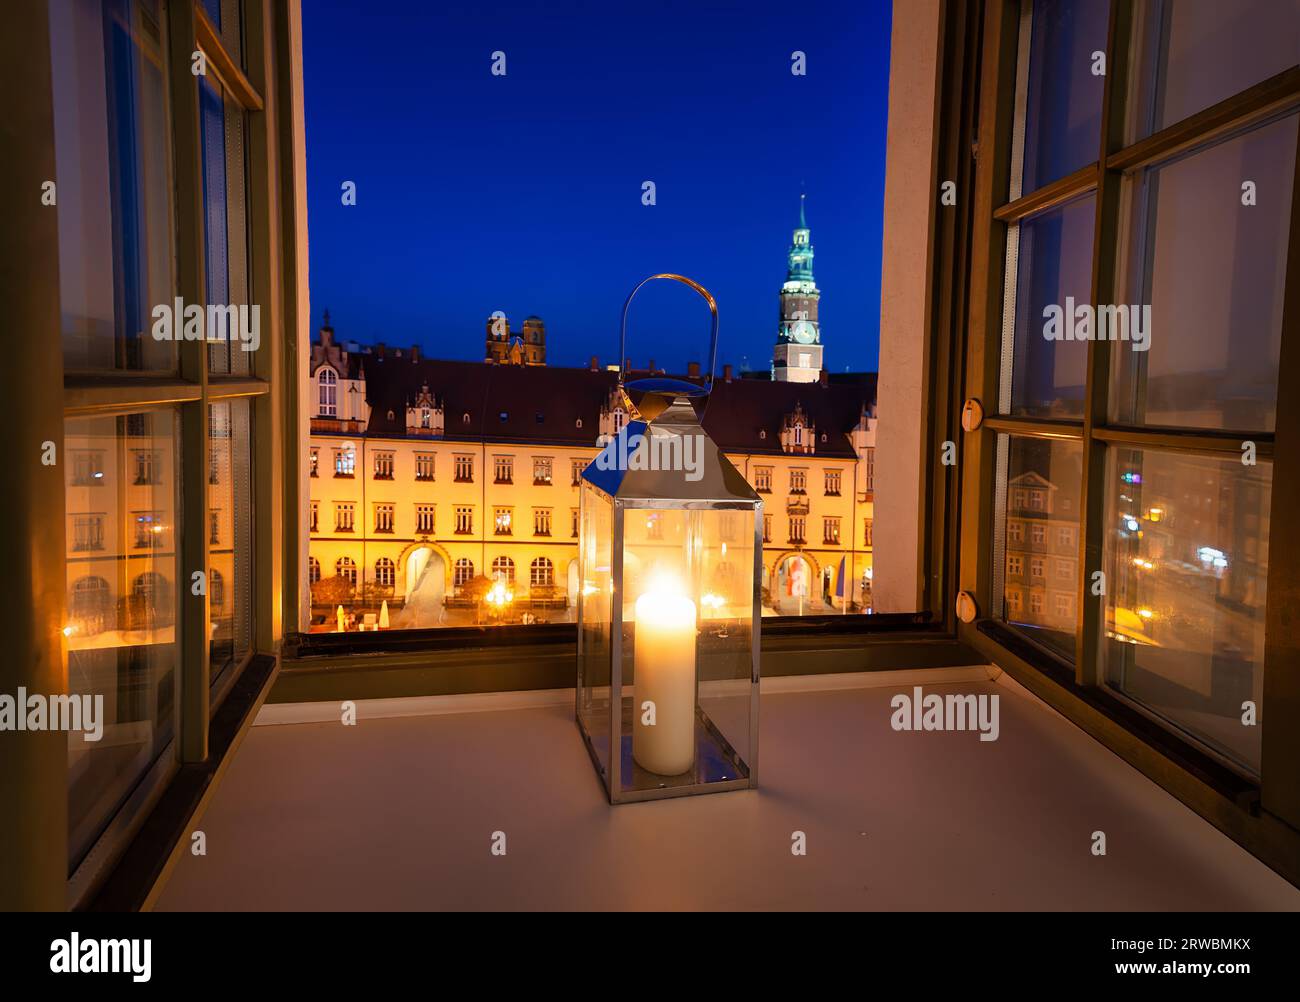 Lamp with a candle in the window. View of the market square Stock Photo